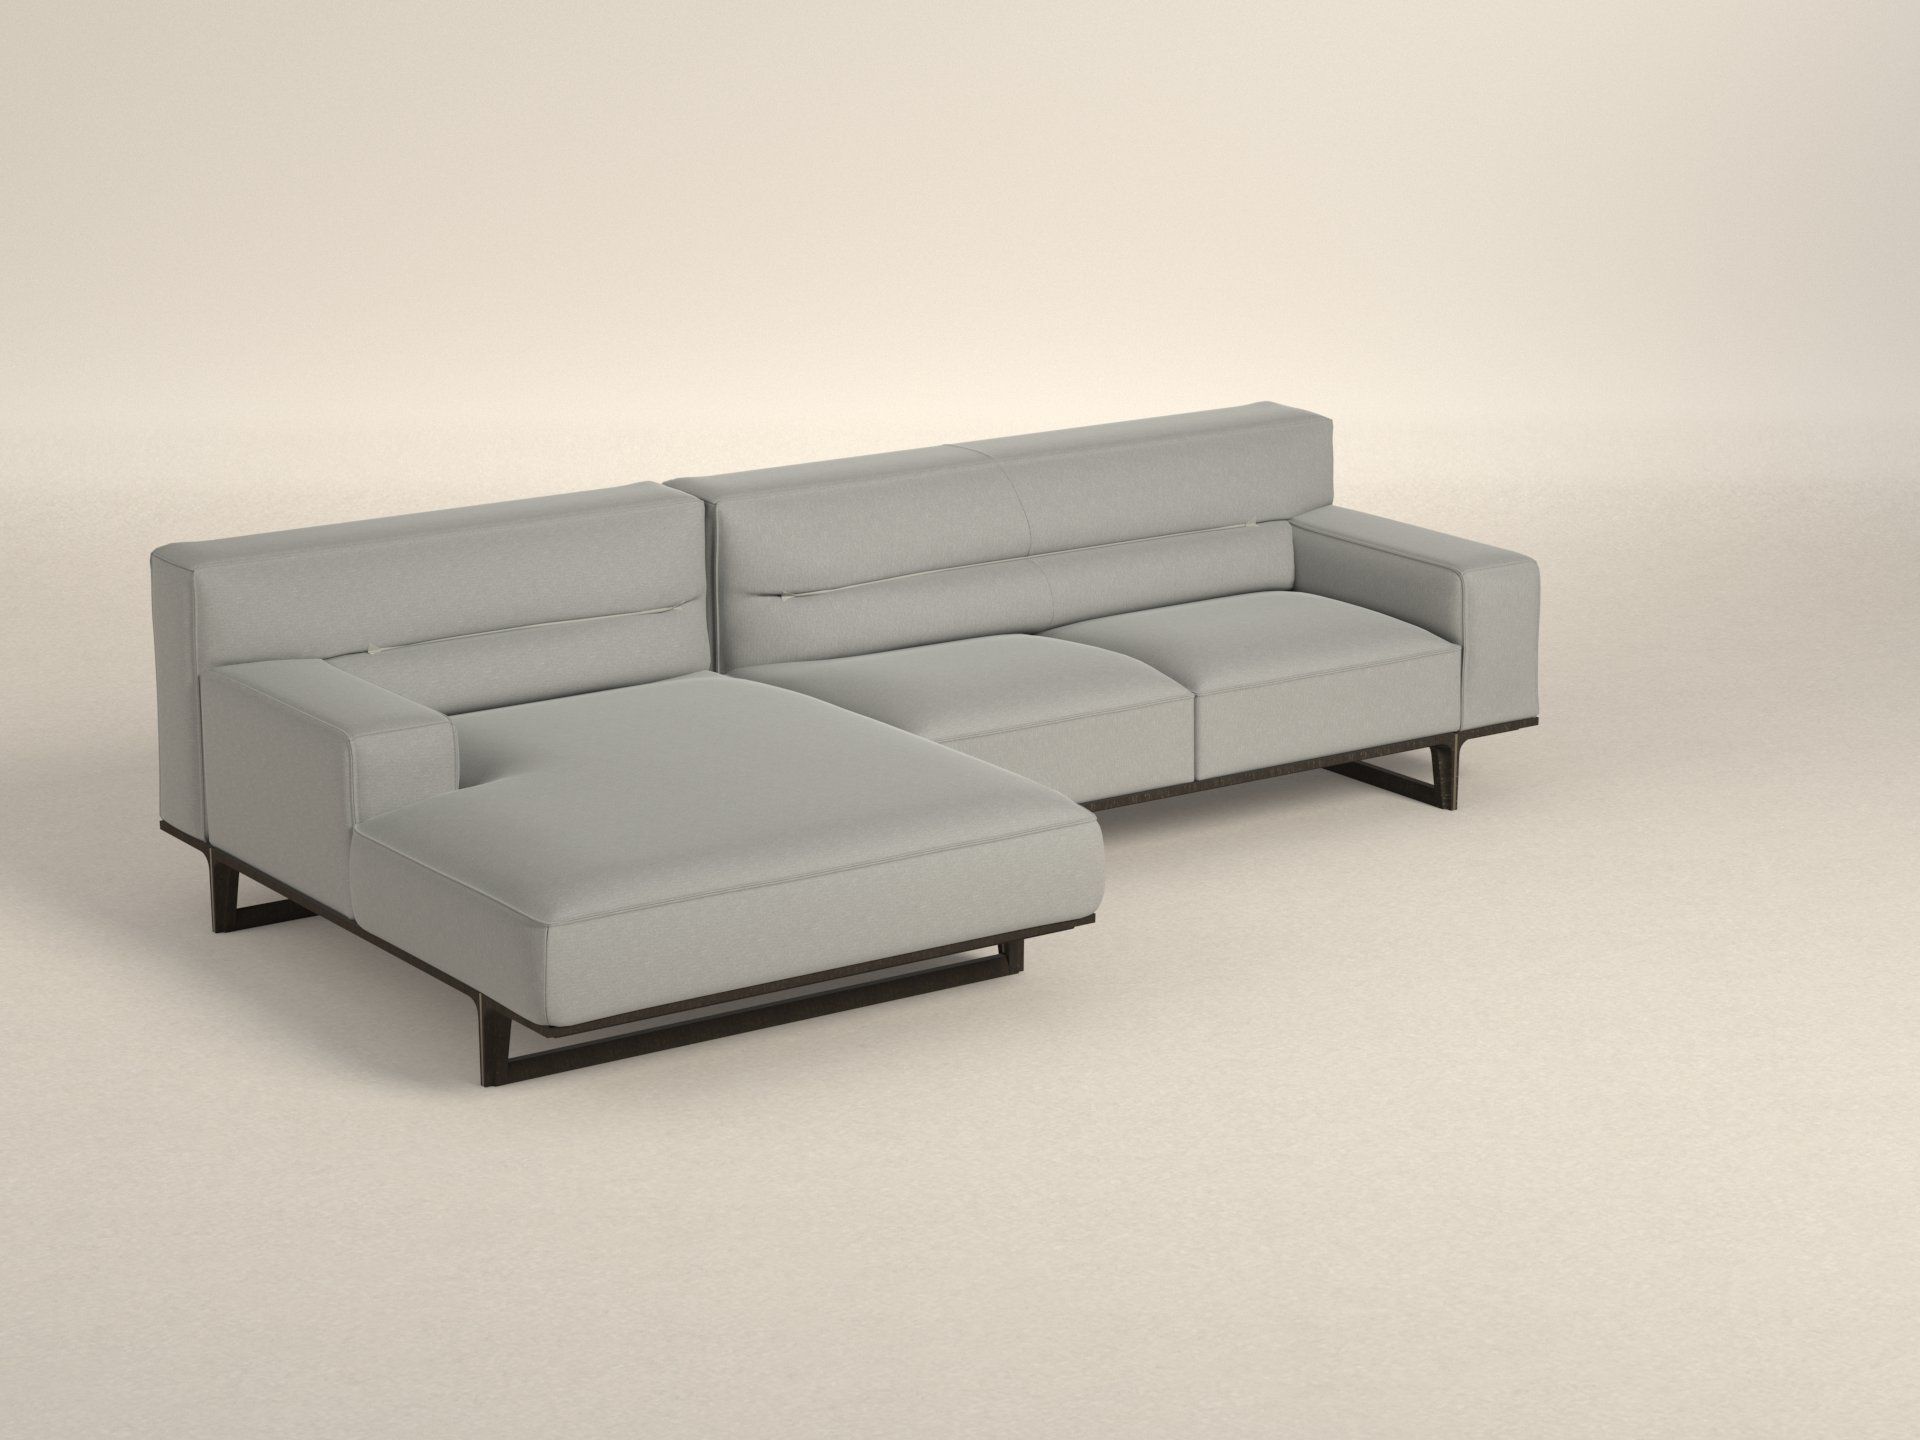 Preset default image - Kendo Sofa with Chaise on left side - Fabric